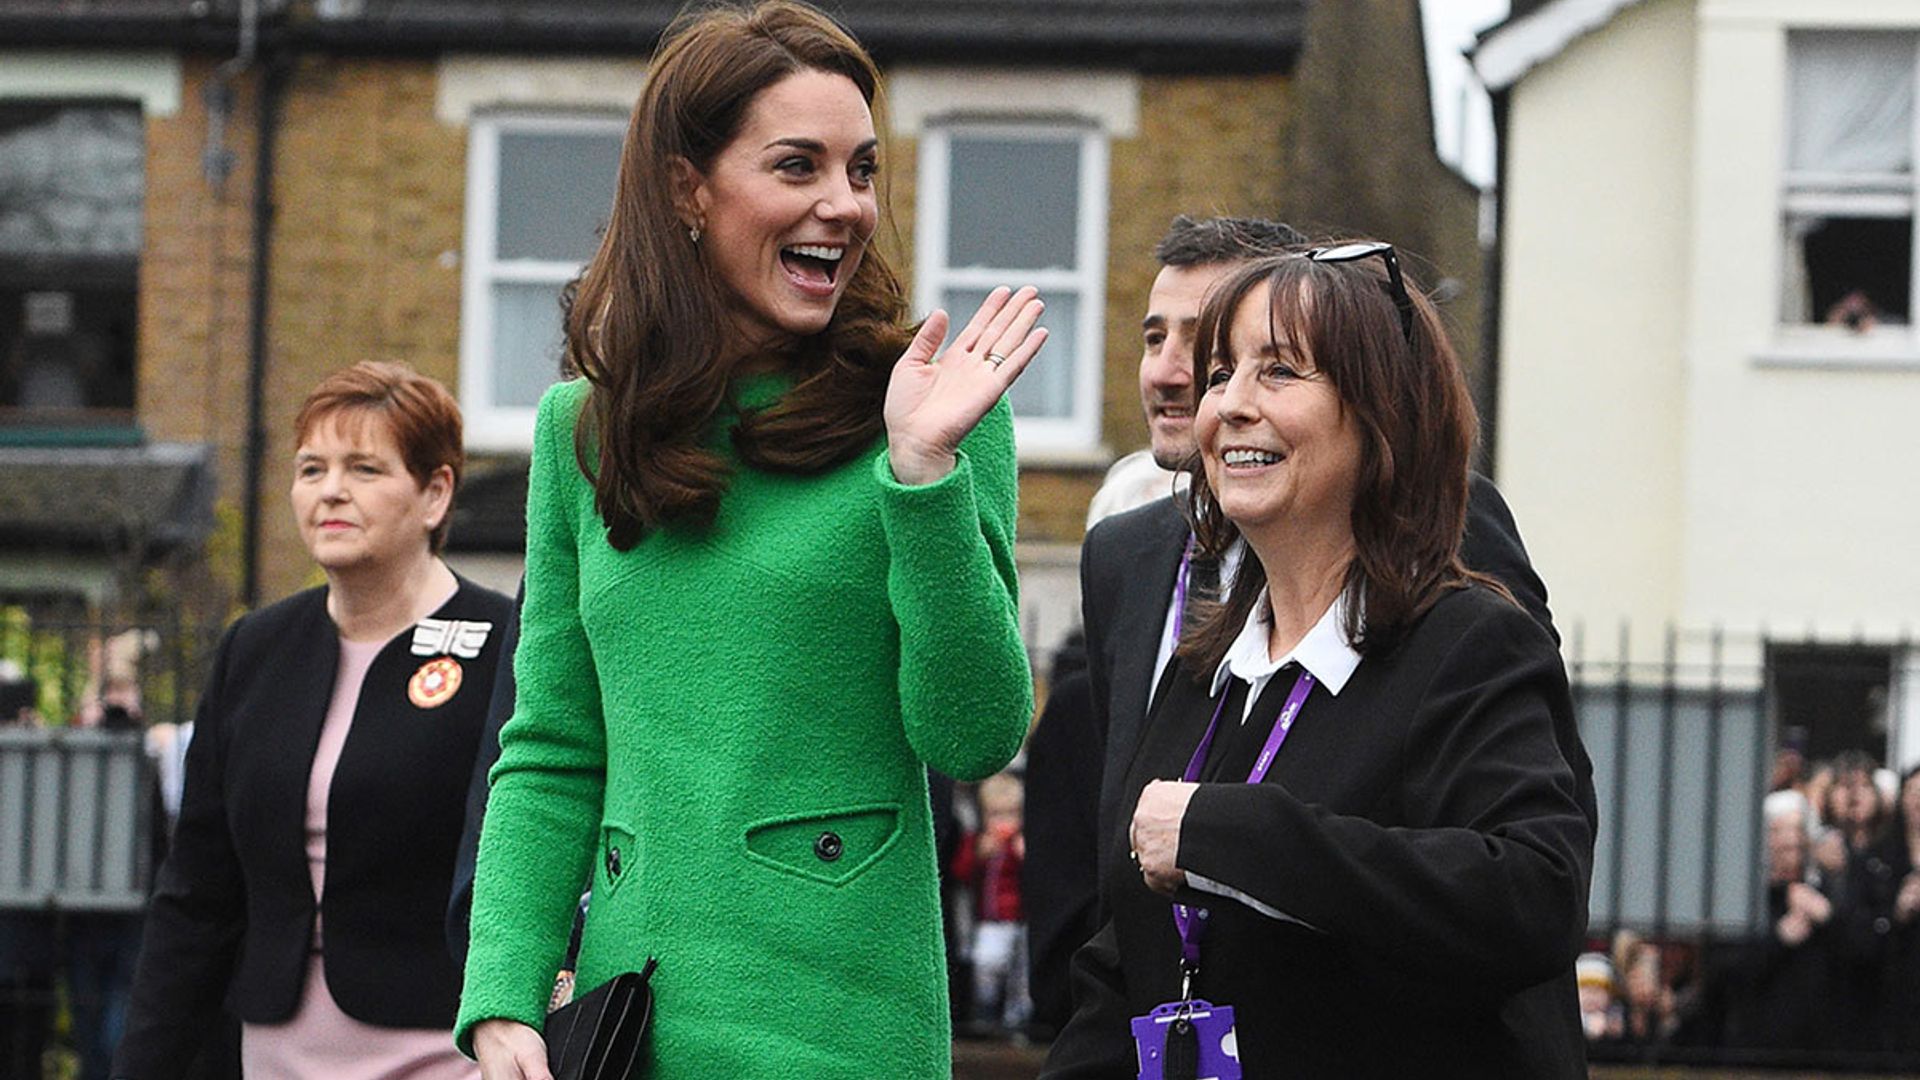 Kate Middleton reveals the one item that makes her happy on London school visit – see best photos